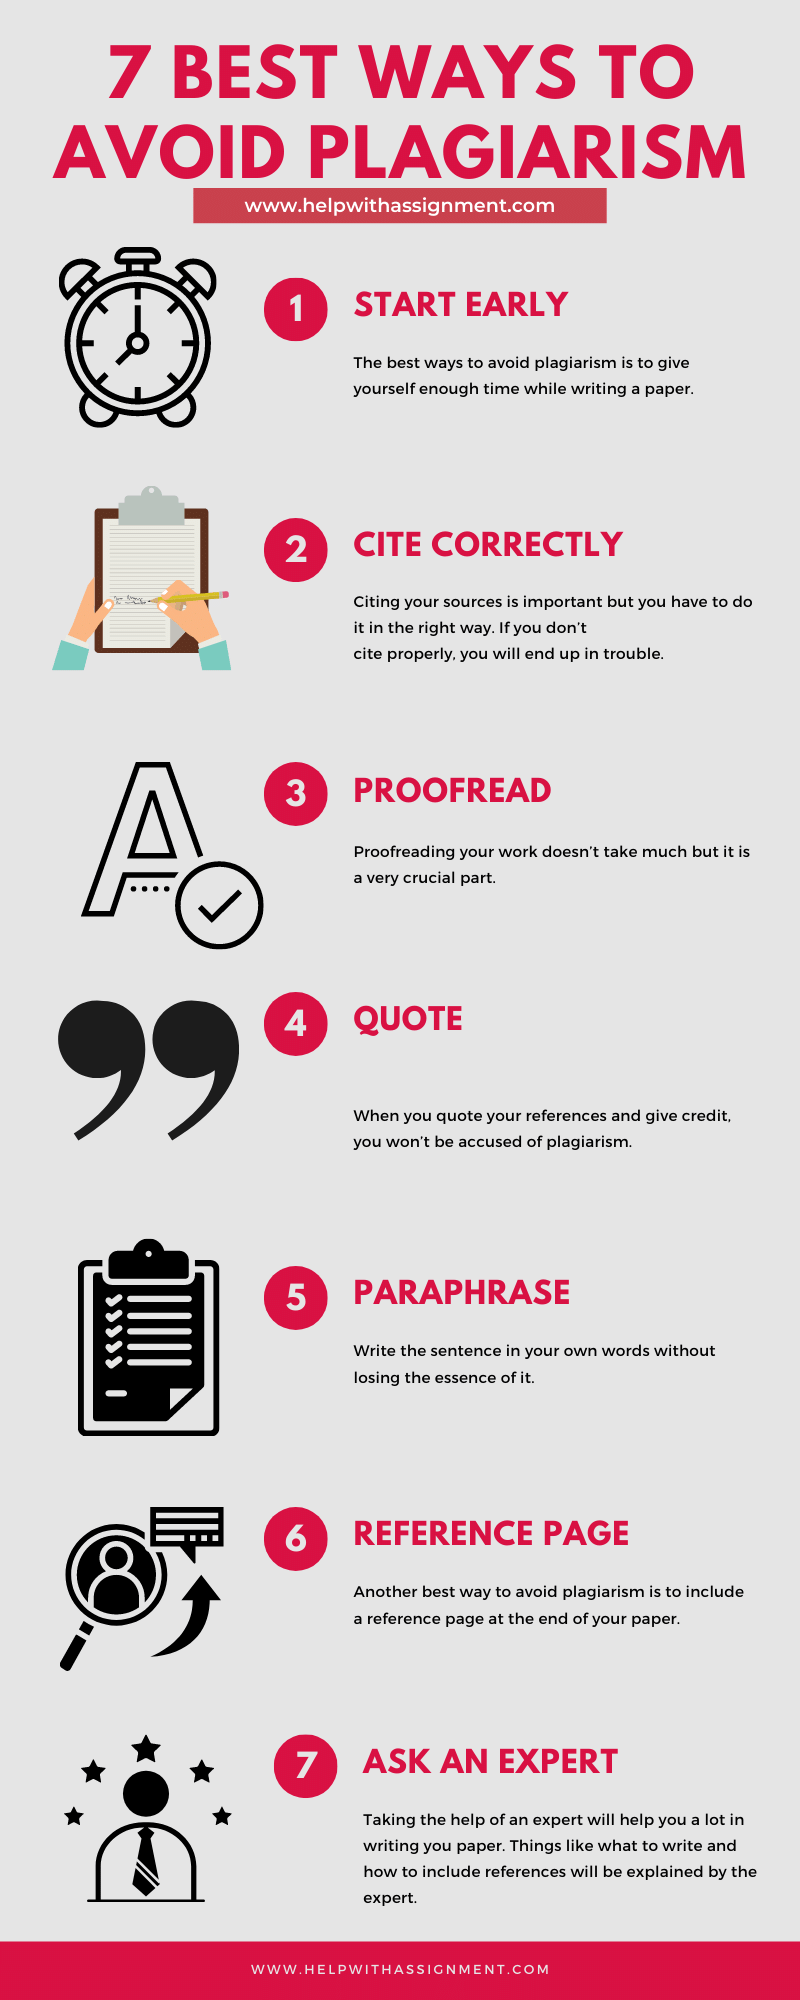 how to change an essay to avoid plagiarism